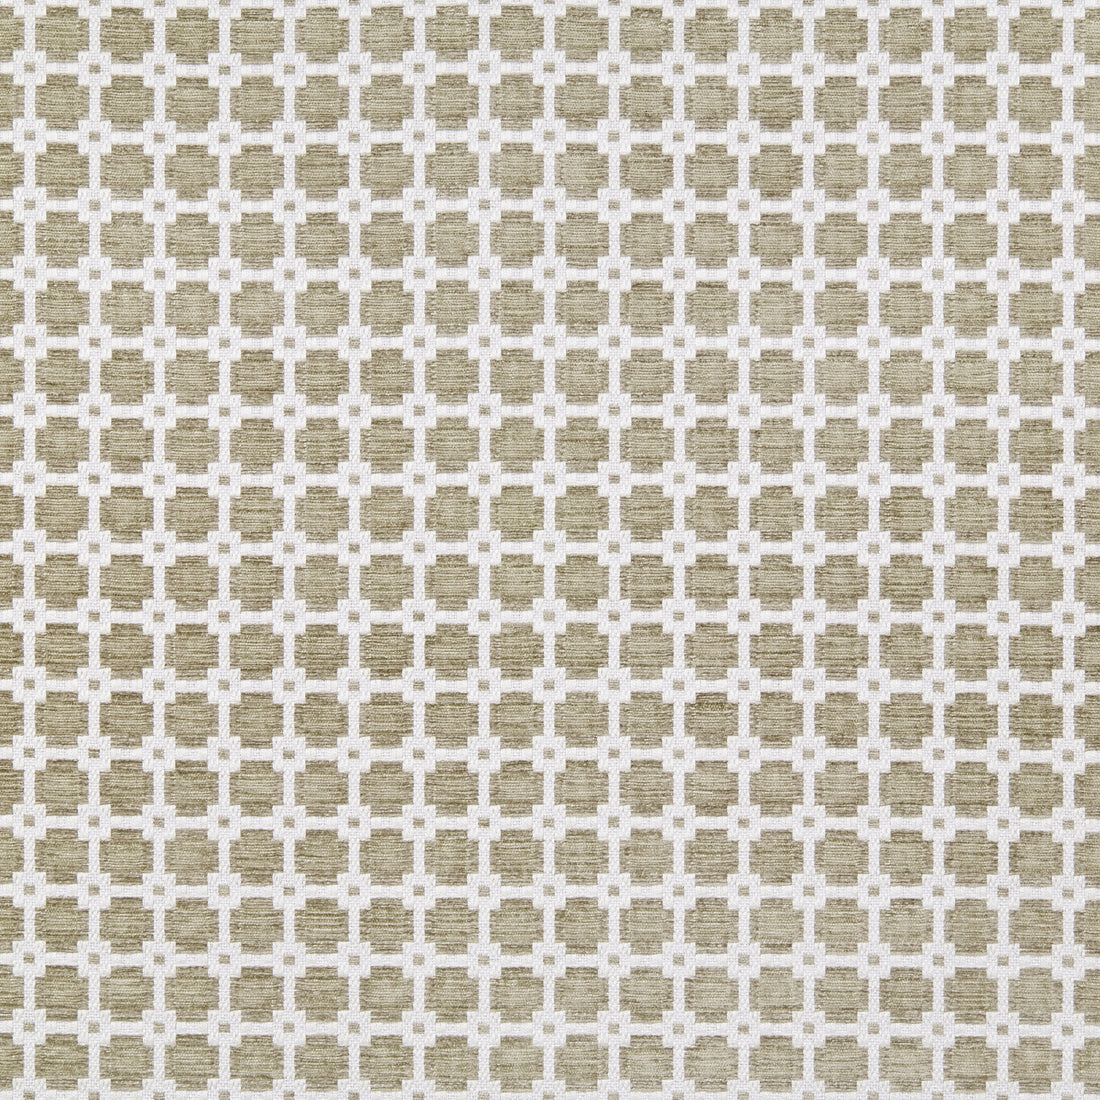 Apollo fabric in flax color - pattern number W80720 - by Thibaut in the Woven Resource 11: Rialto collection